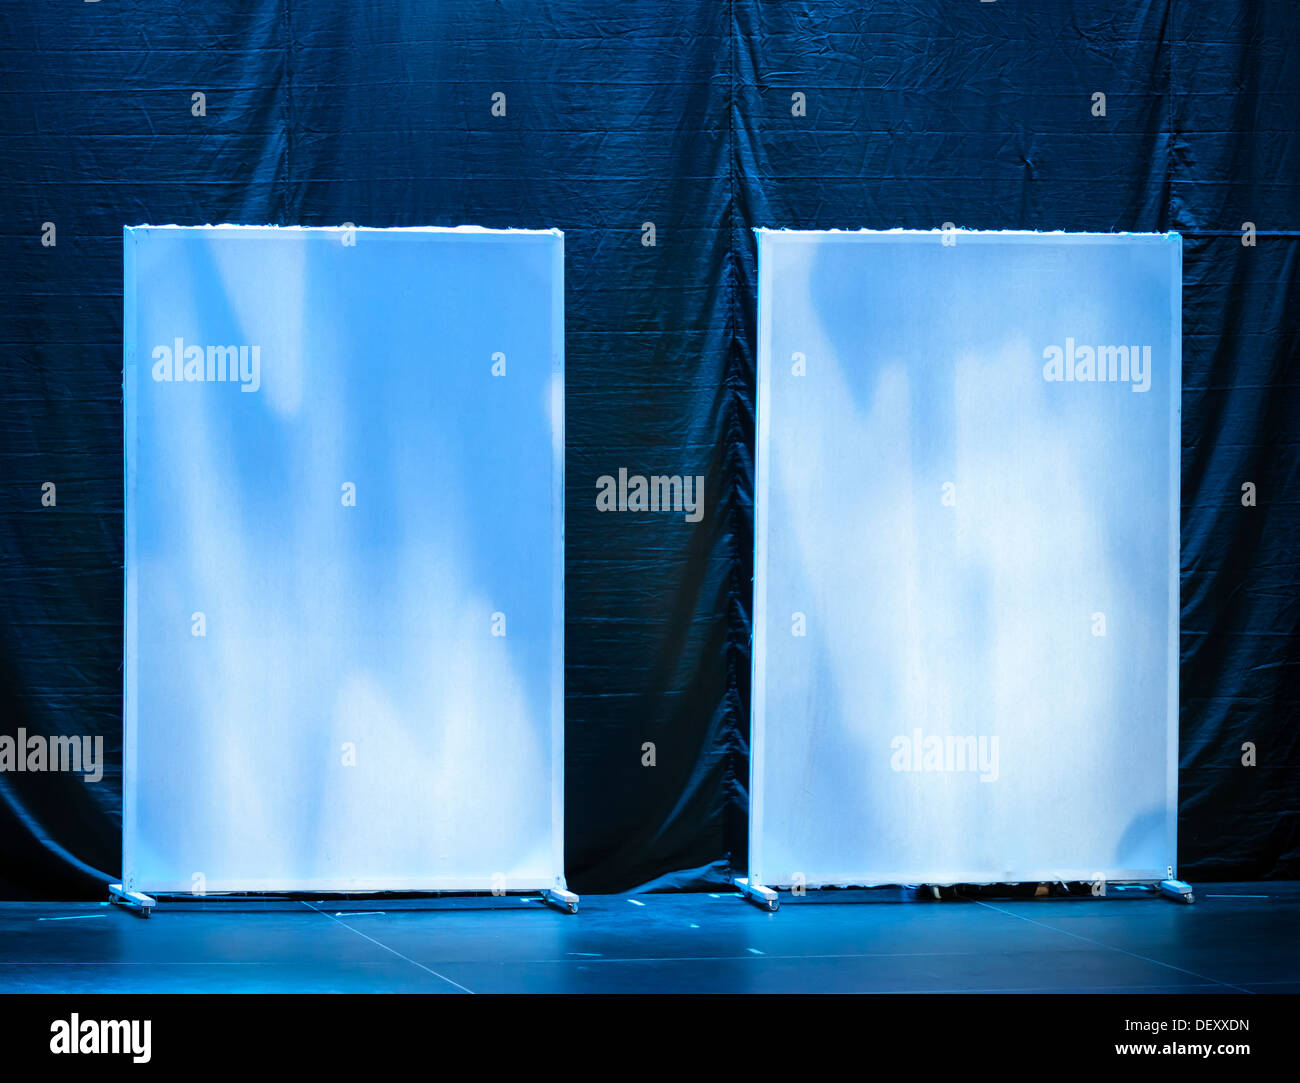 Abstract theatrical scenery stand on the stage with blue illumination Stock Photo